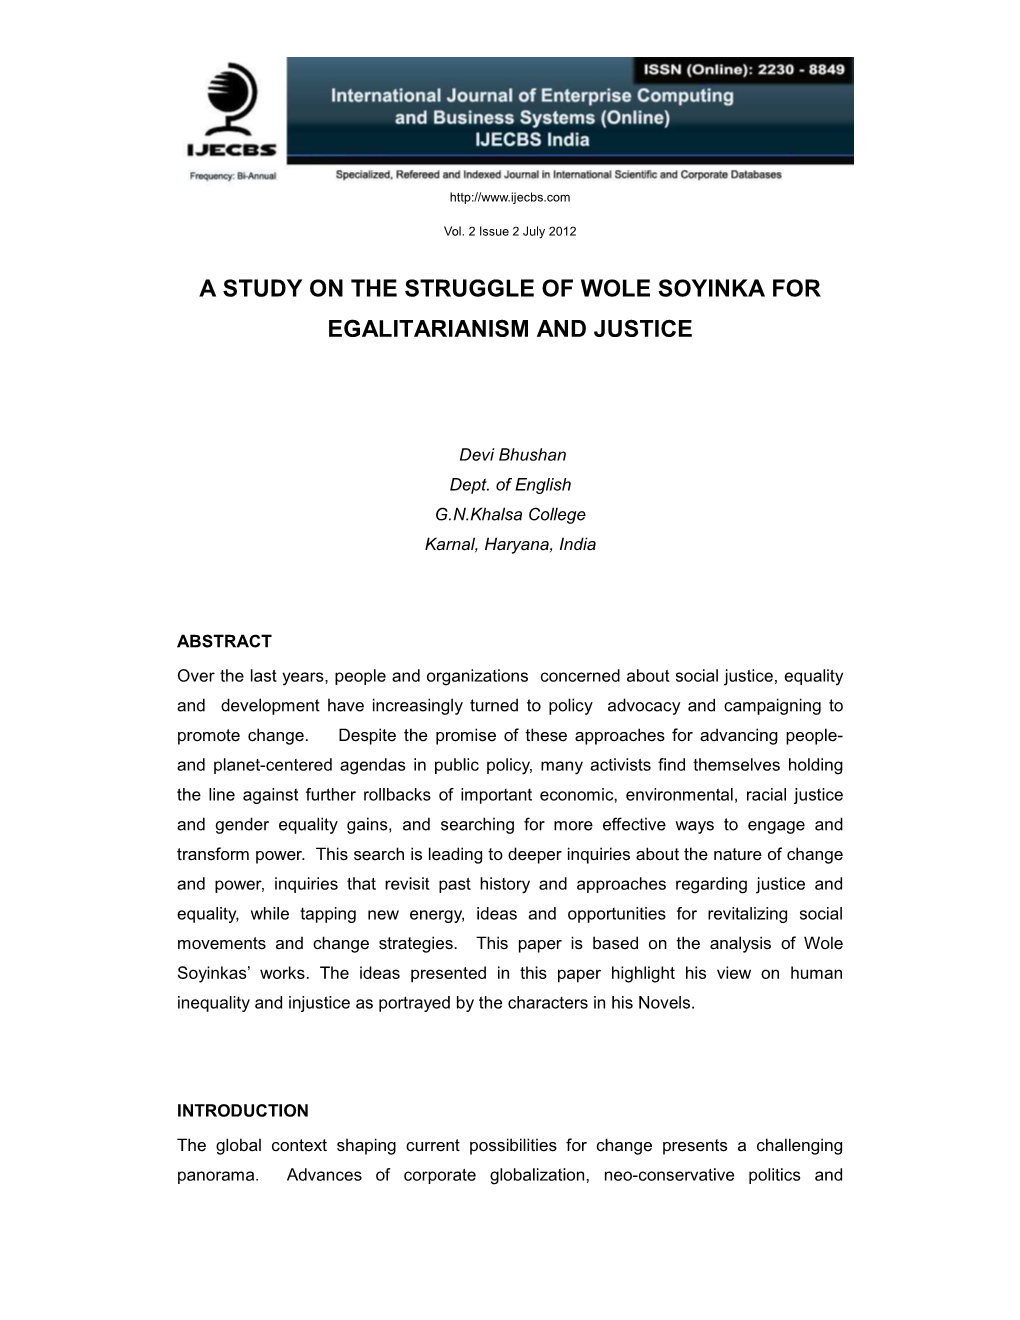 Title : a Study on the Struggle of Wole Soyinka for Egalitarianism and Justice